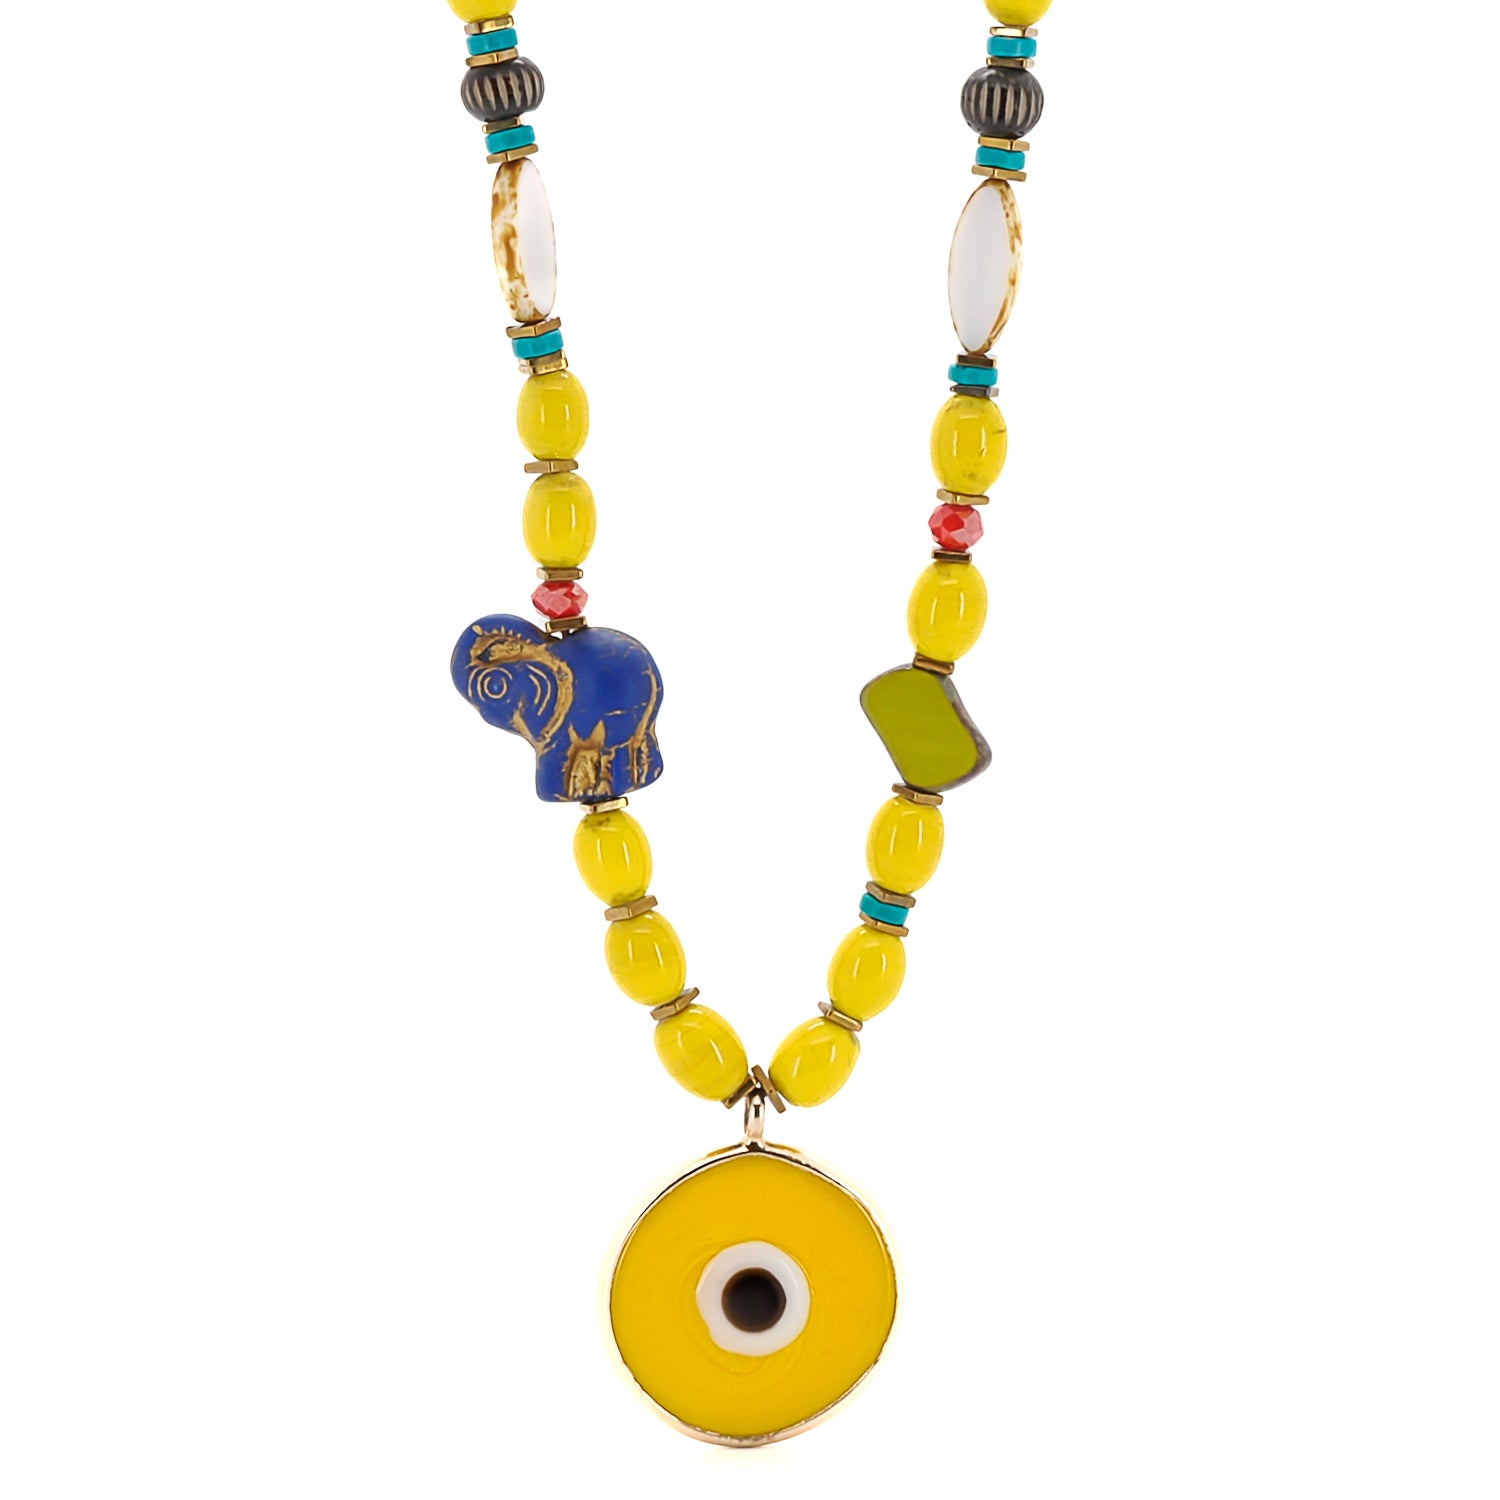 Carpe Diem Necklace featuring turquoise stone beads and African handmade beads.